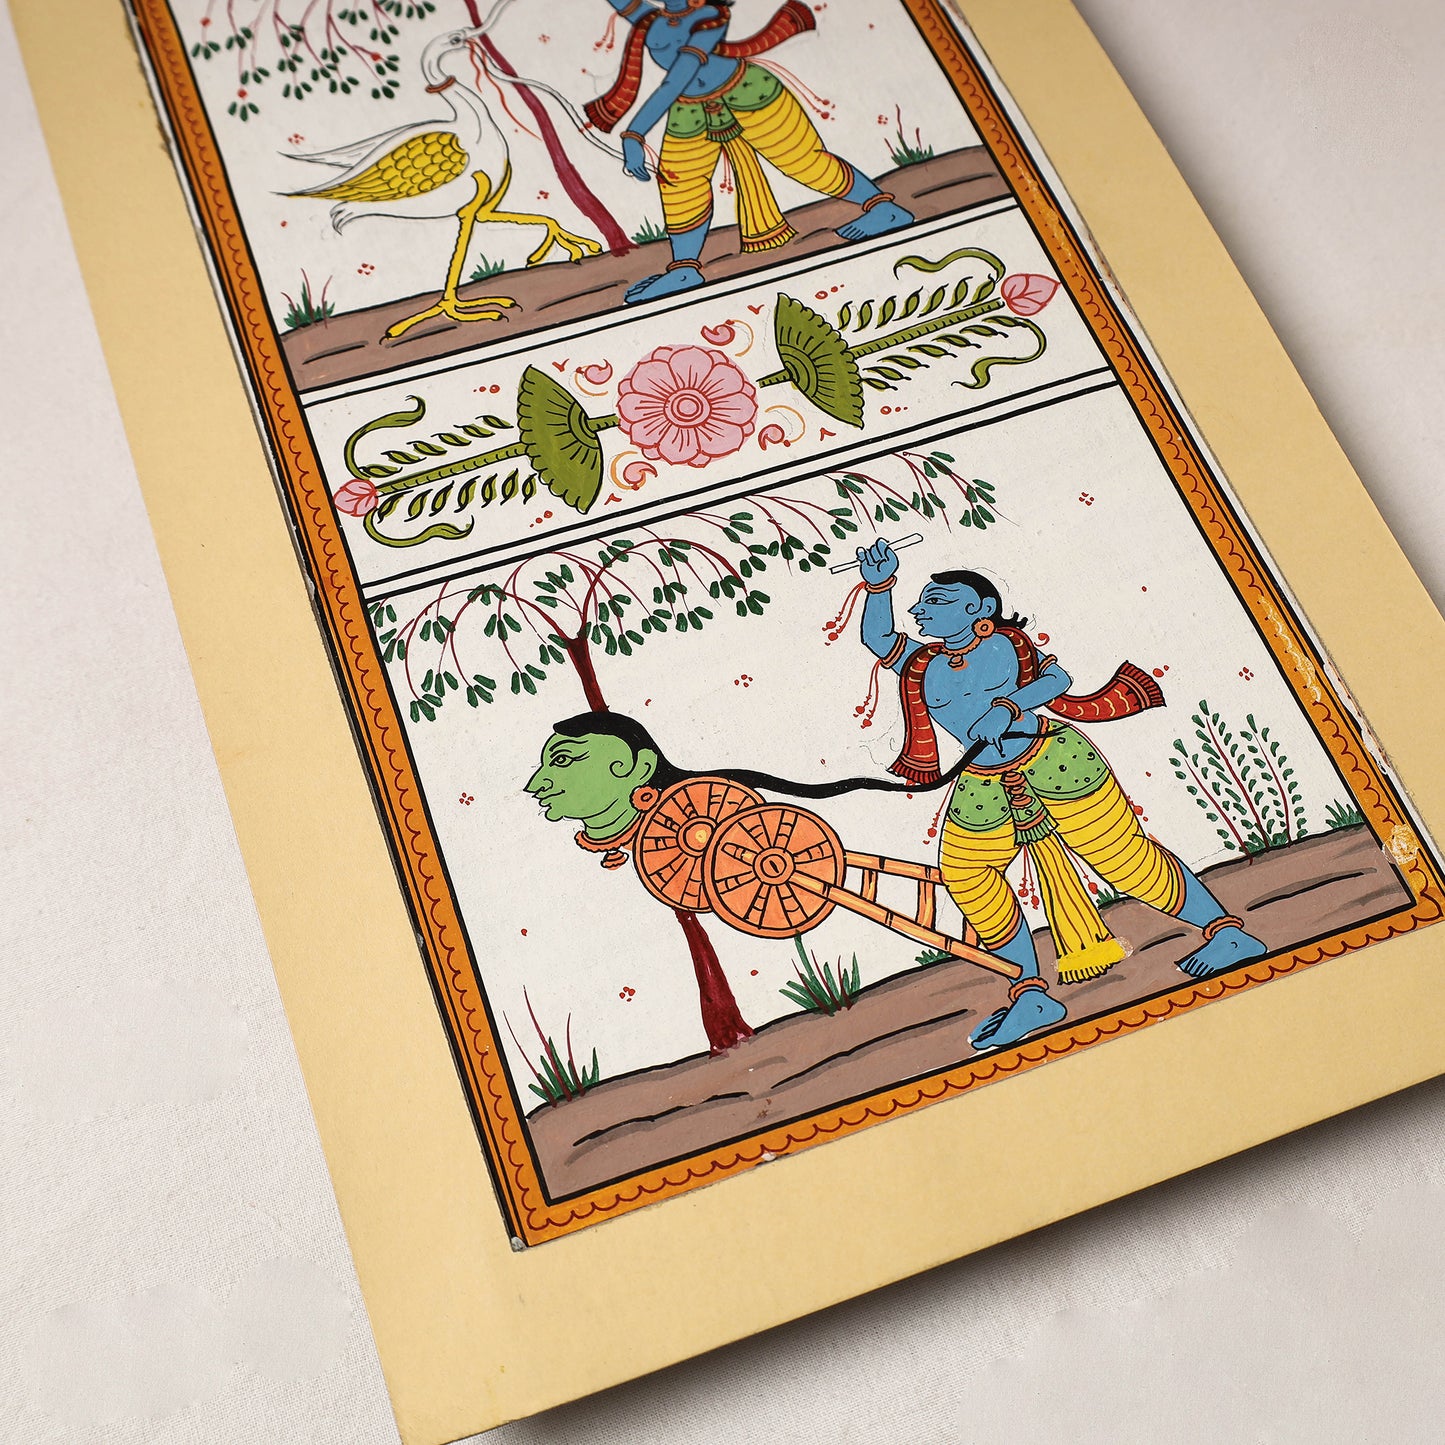 Pattachitra Painting on Handmade Paper (13 x 8 in)